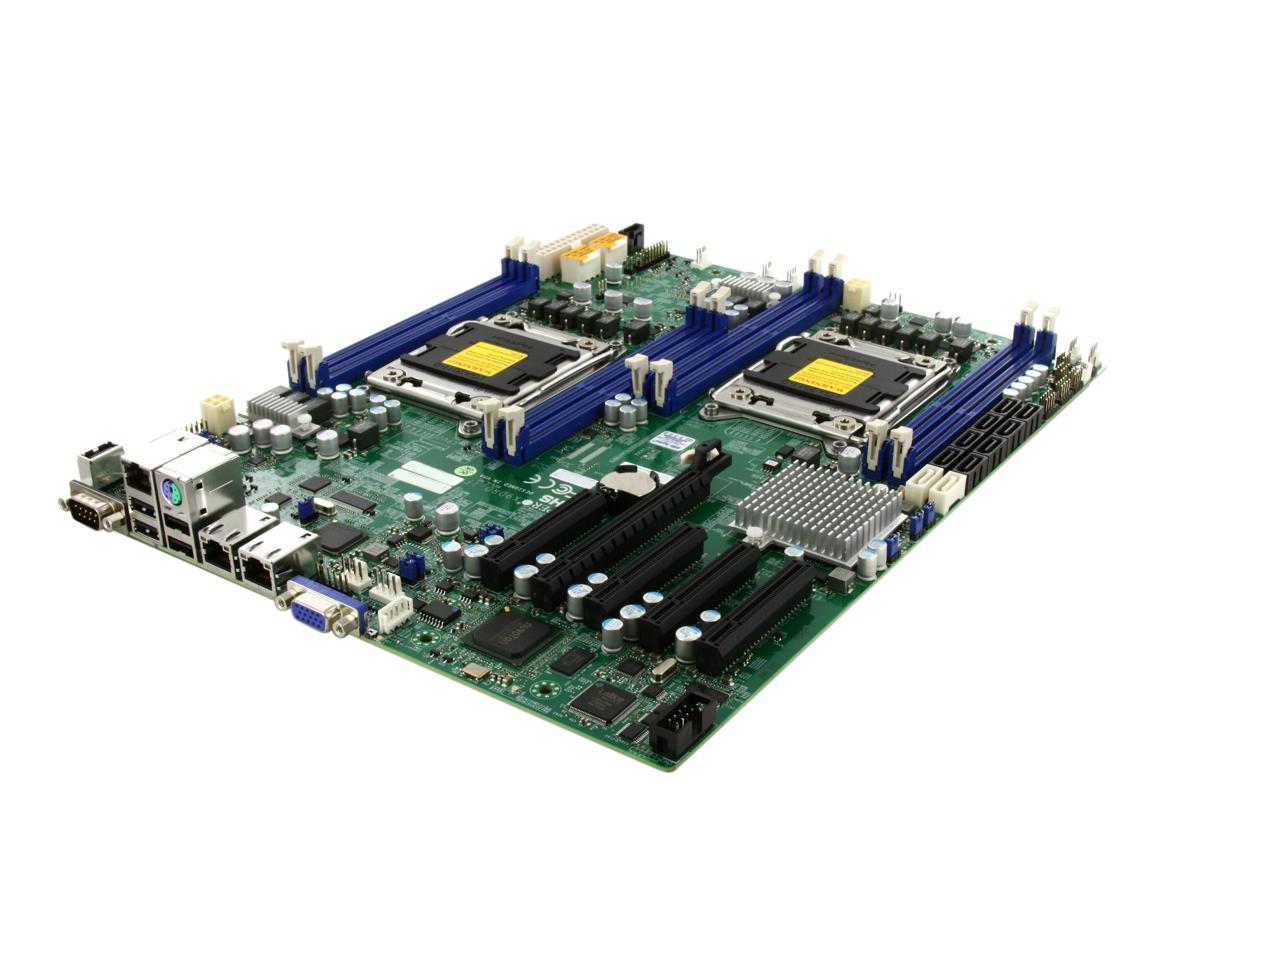 SUPERMICRO MBD-X9DRD-IF-O Extended ATX Server Motherboard - Newegg.com